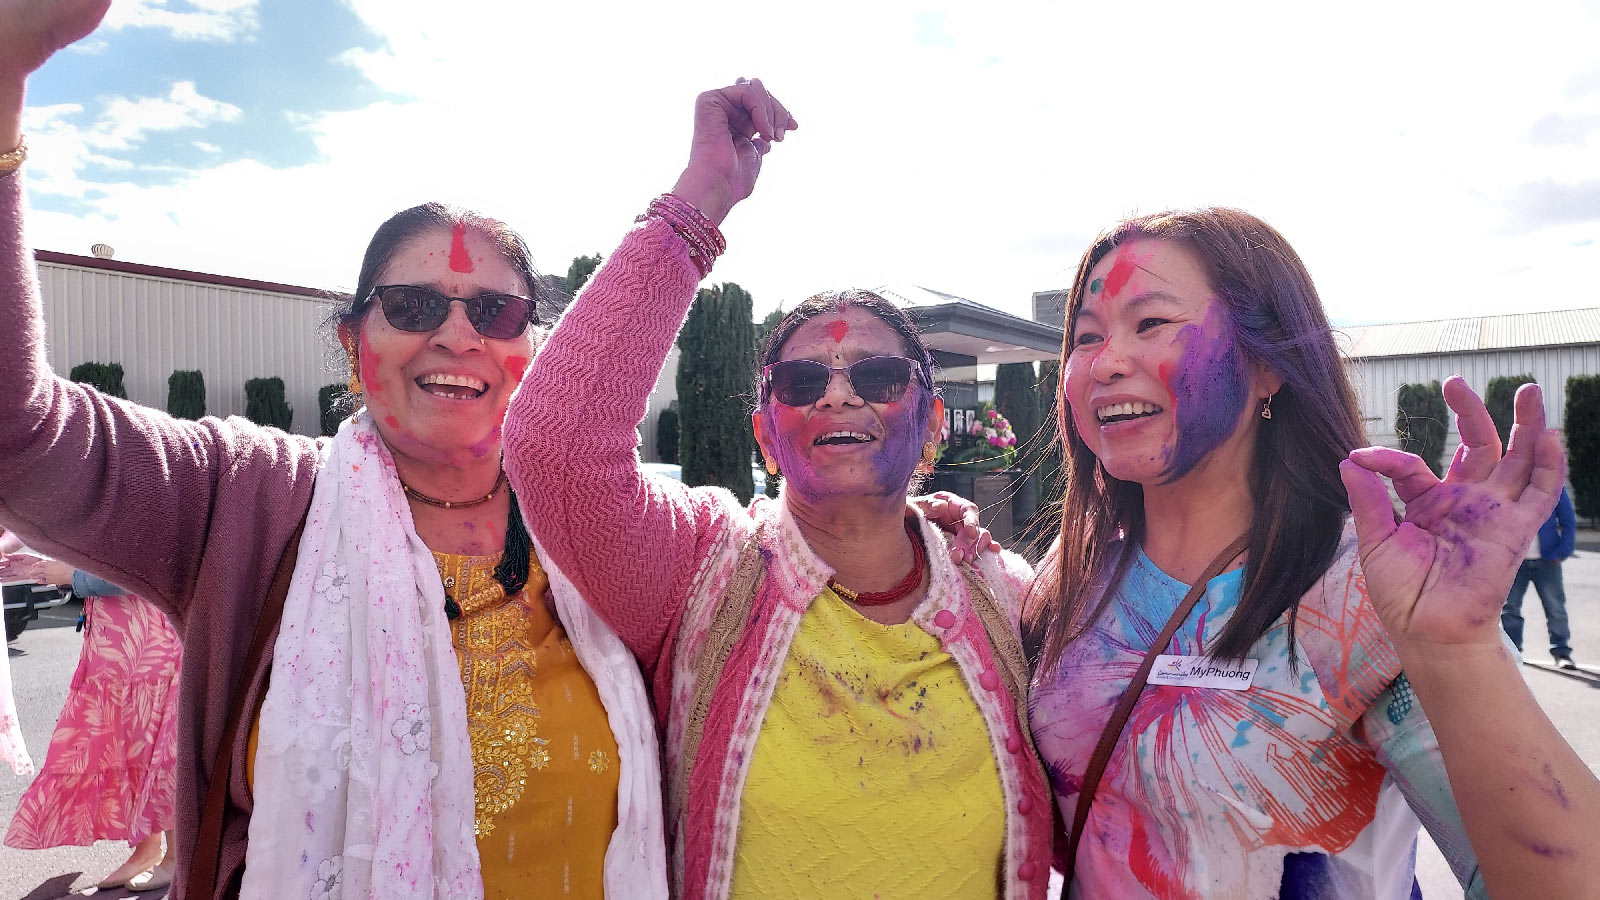 Three women with arms raised, faces painted with coloured powder, happy, laughing.